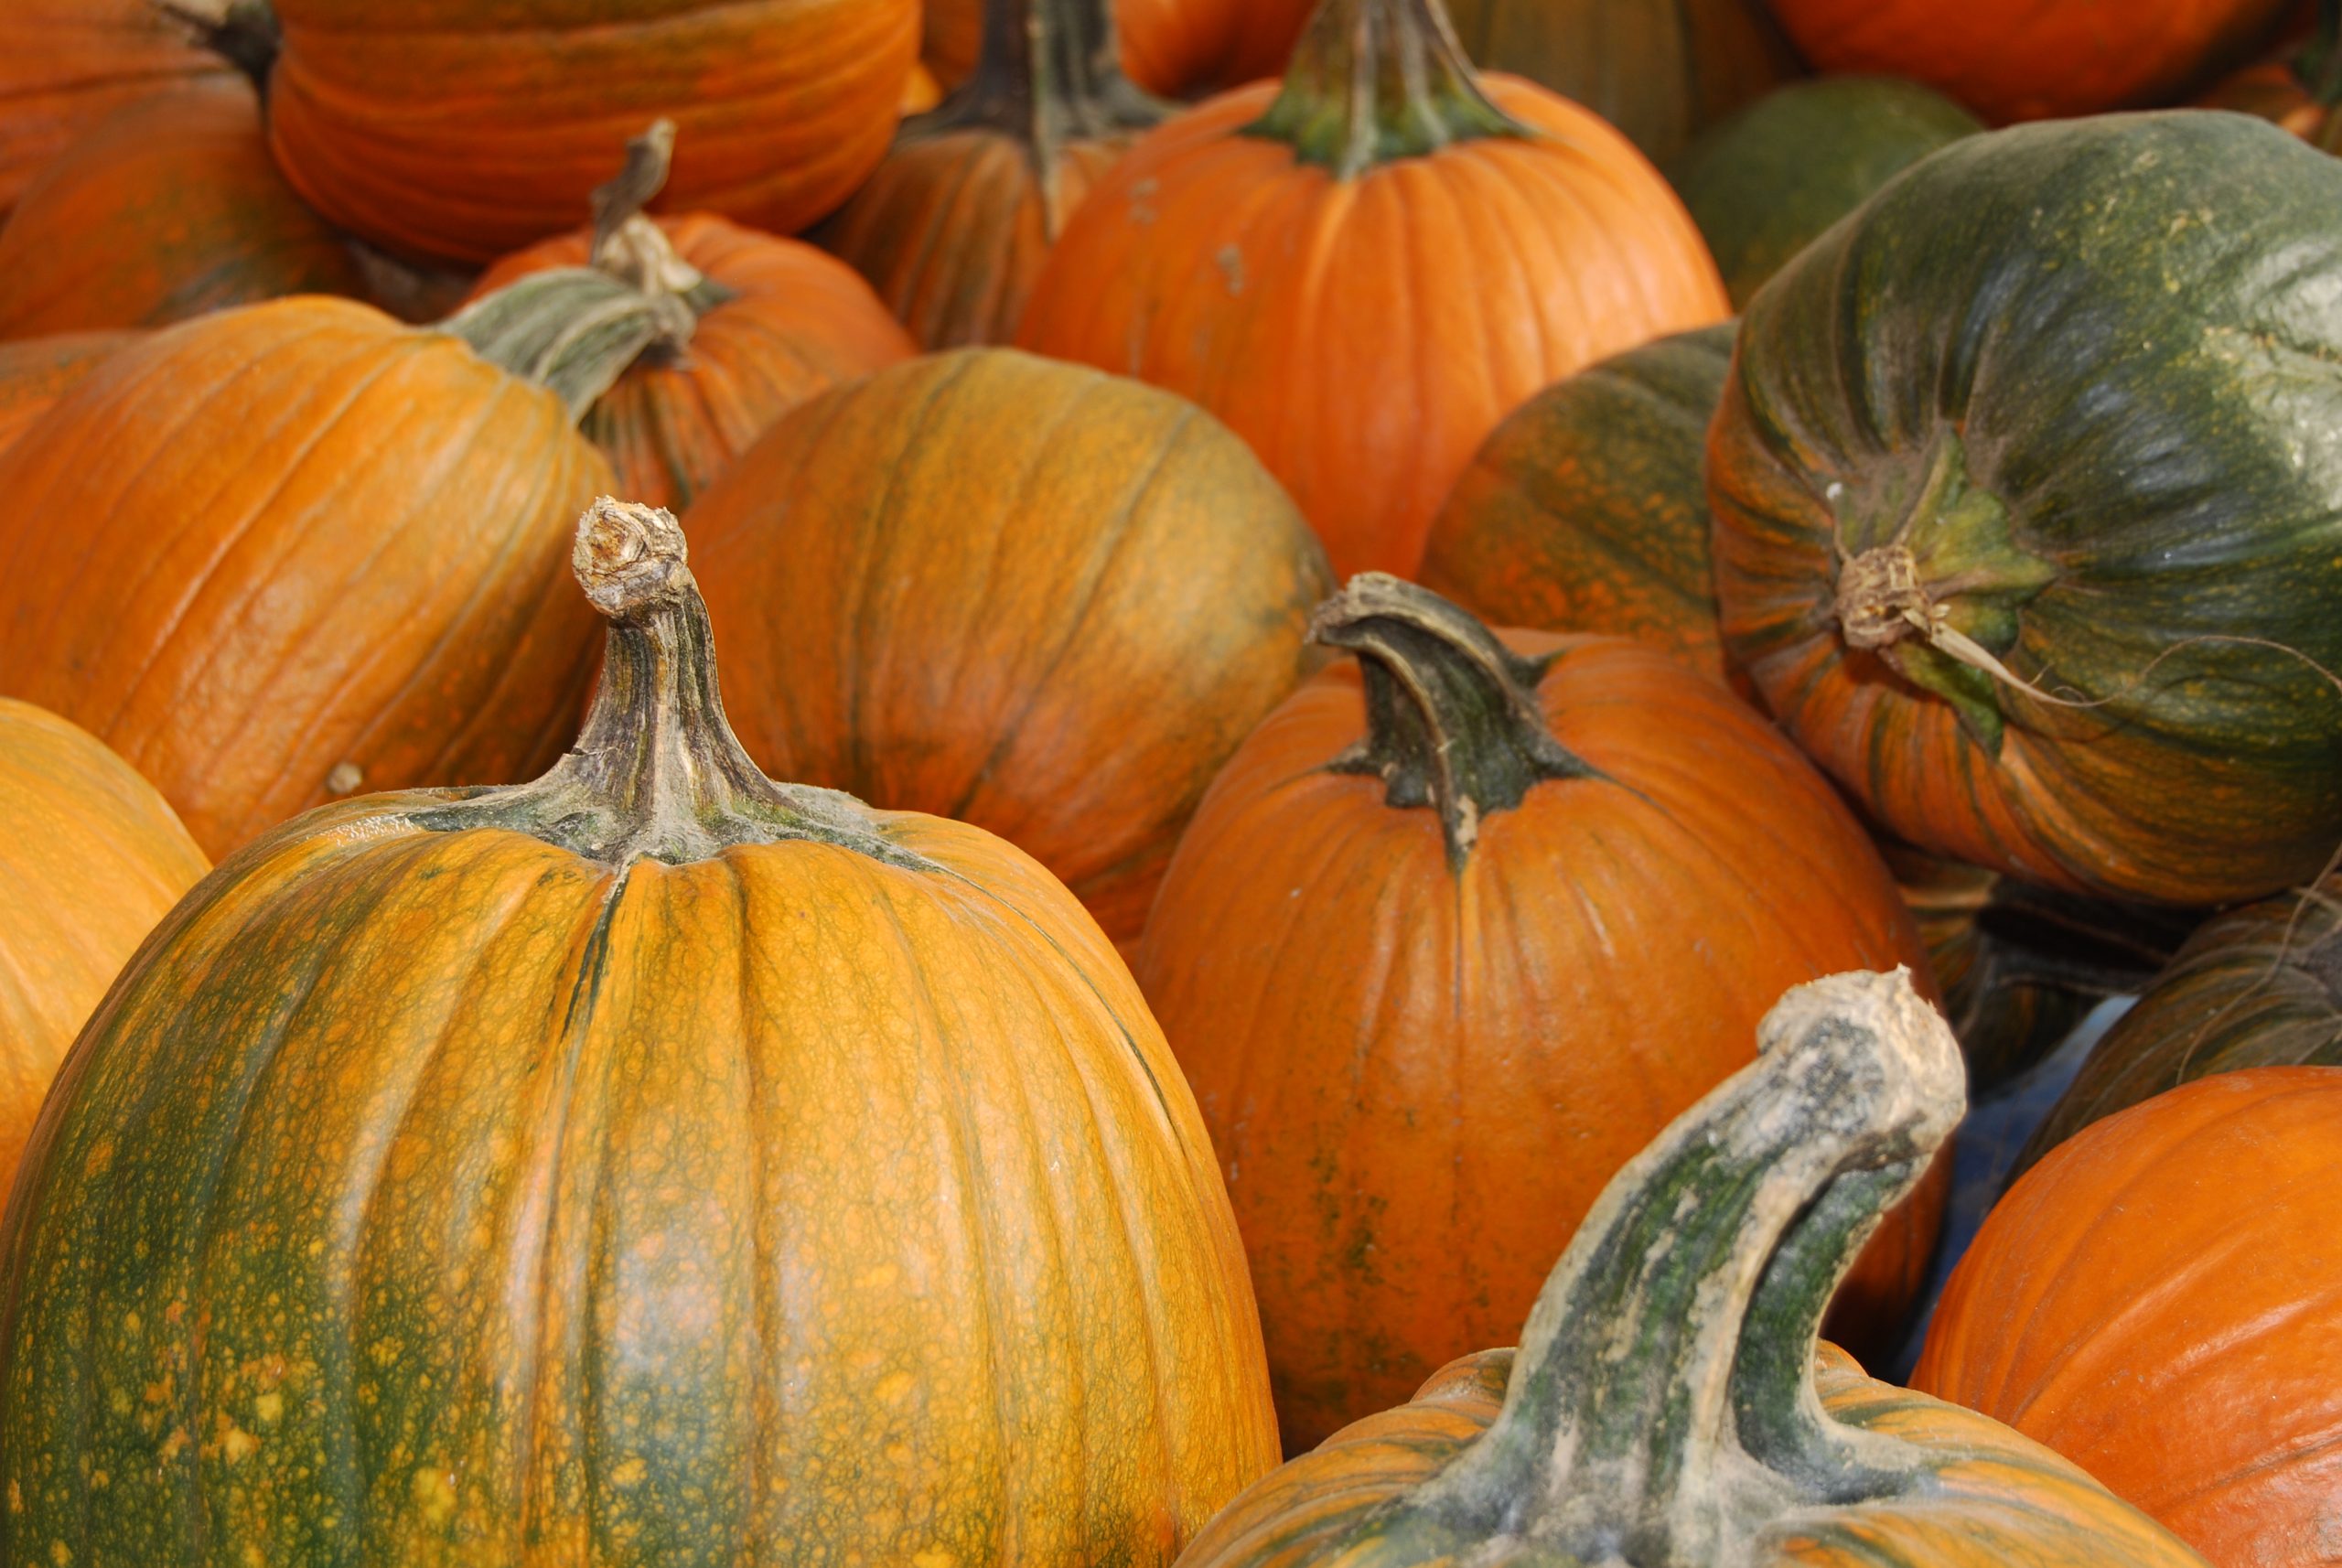 Colorful Pumpkins (user submitted)